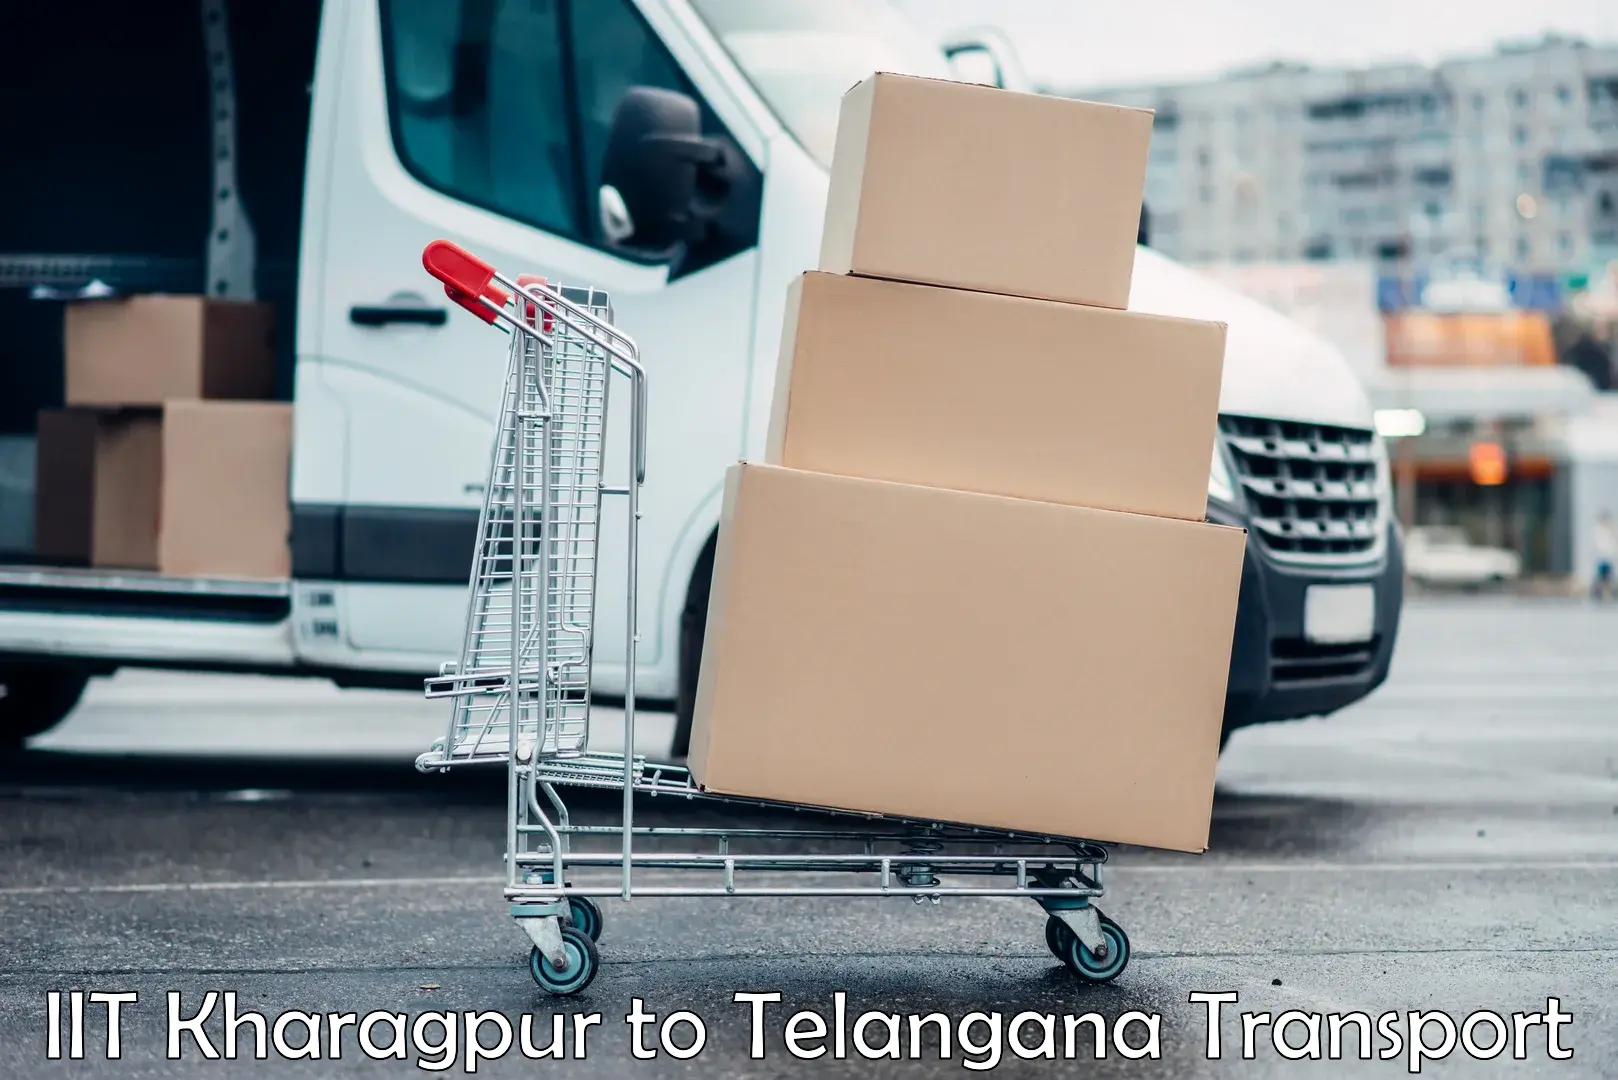 Delivery service IIT Kharagpur to Chegunta